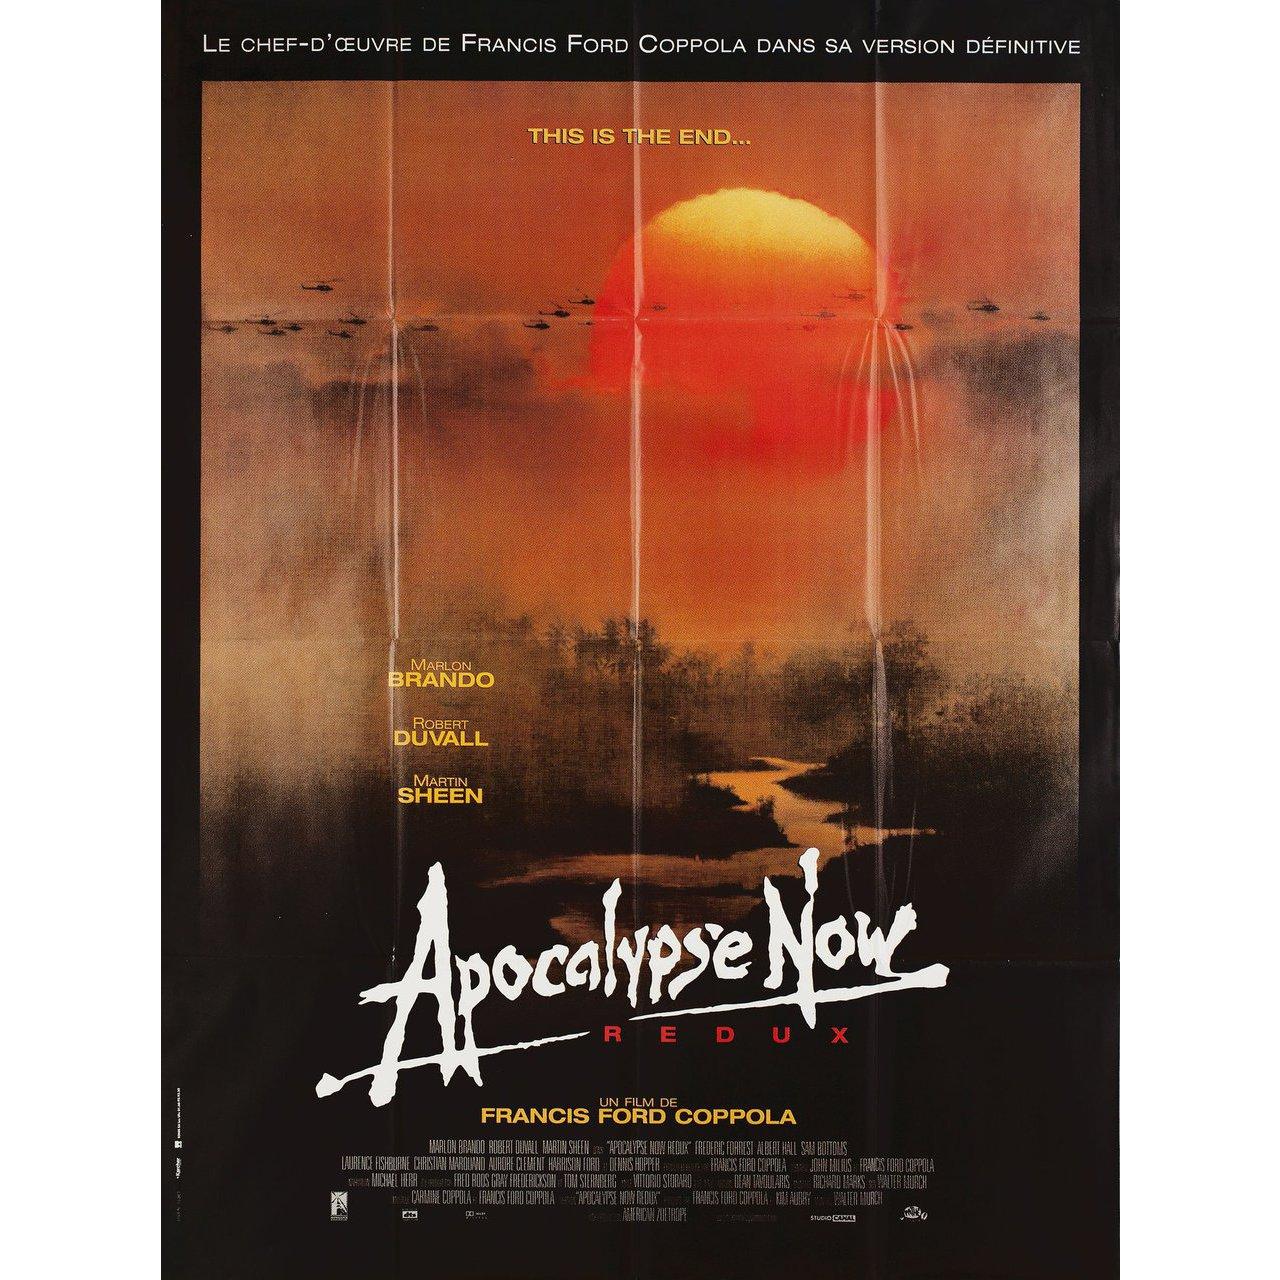 Original 2001 re-release French grande poster for the 1979 film 'Apocalypse Now' directed by Francis Ford Coppola with Marlon Brando / Martin Sheen / Robert Duvall / Frederic Forrest. Fine condition, folded. Many original posters were issued folded